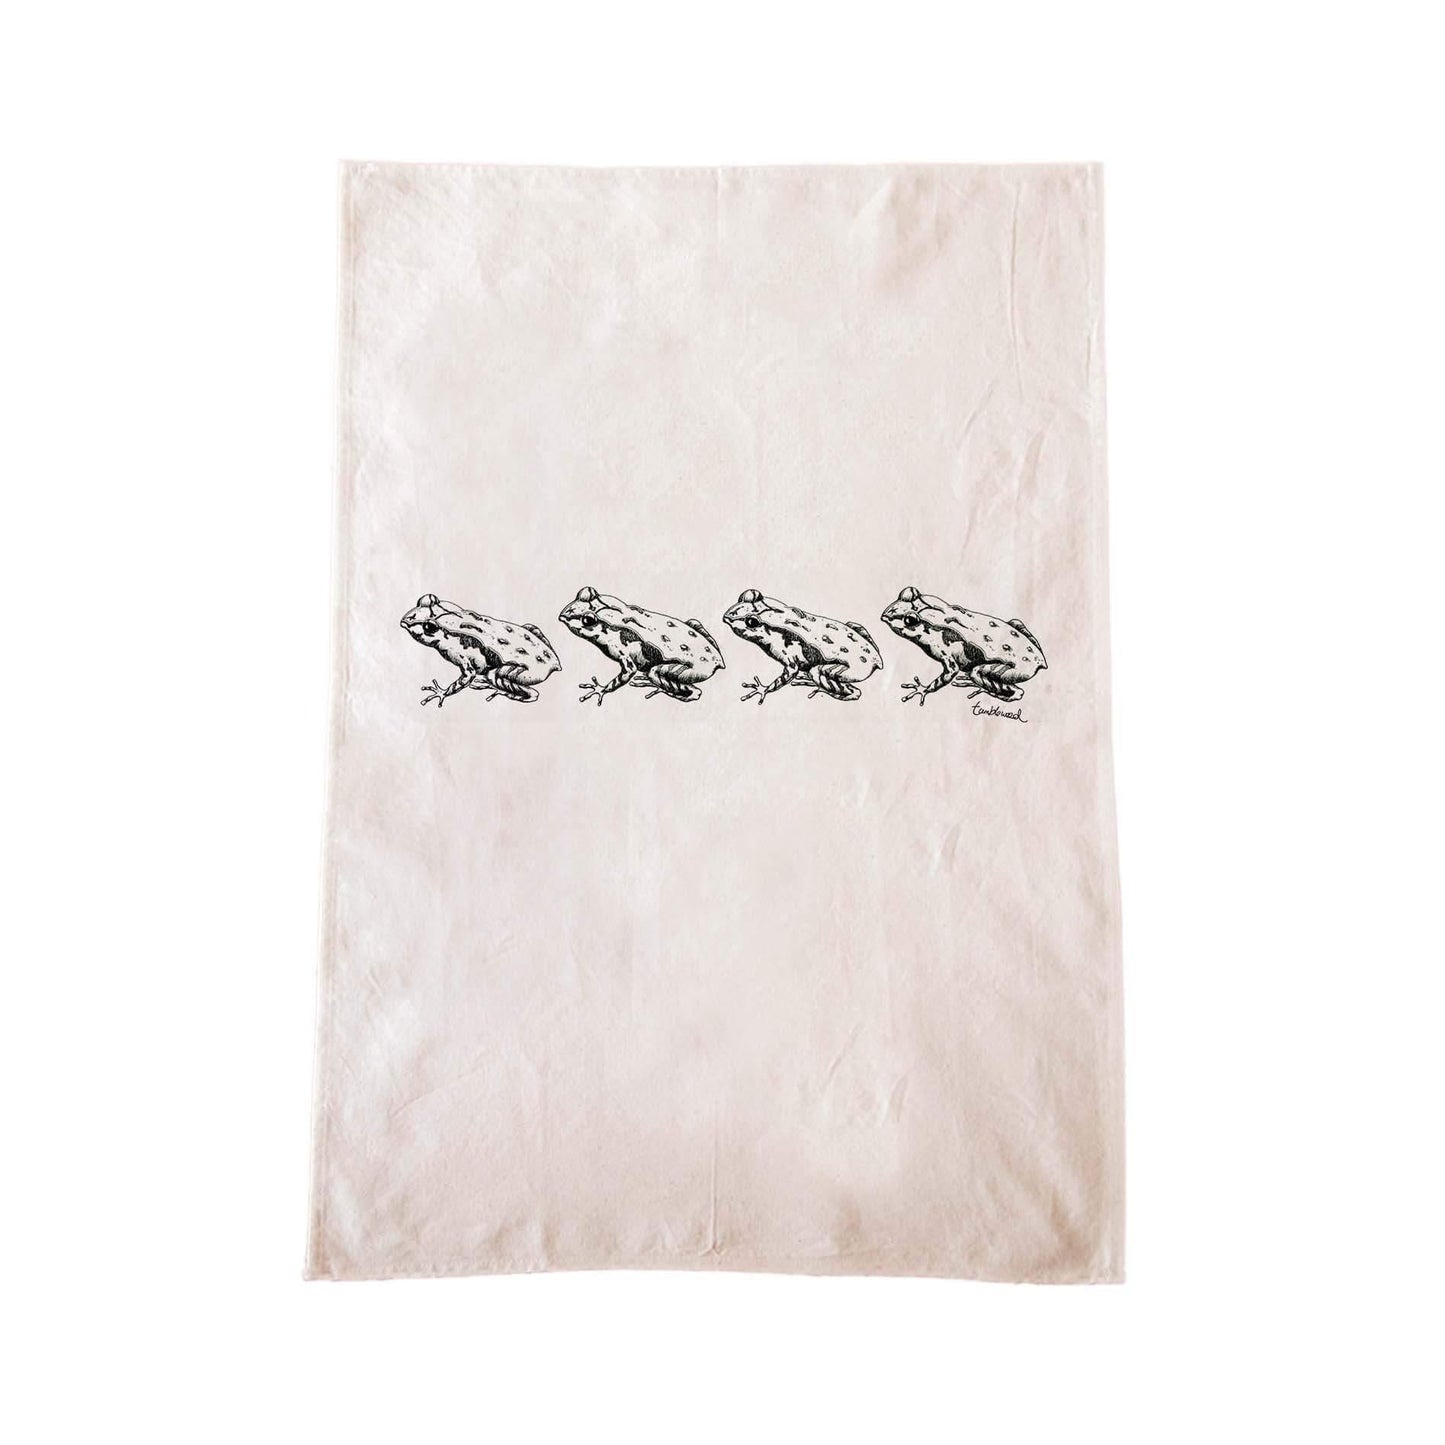 Off-white cotton tea towel with a screen printed Archey's Frog design.